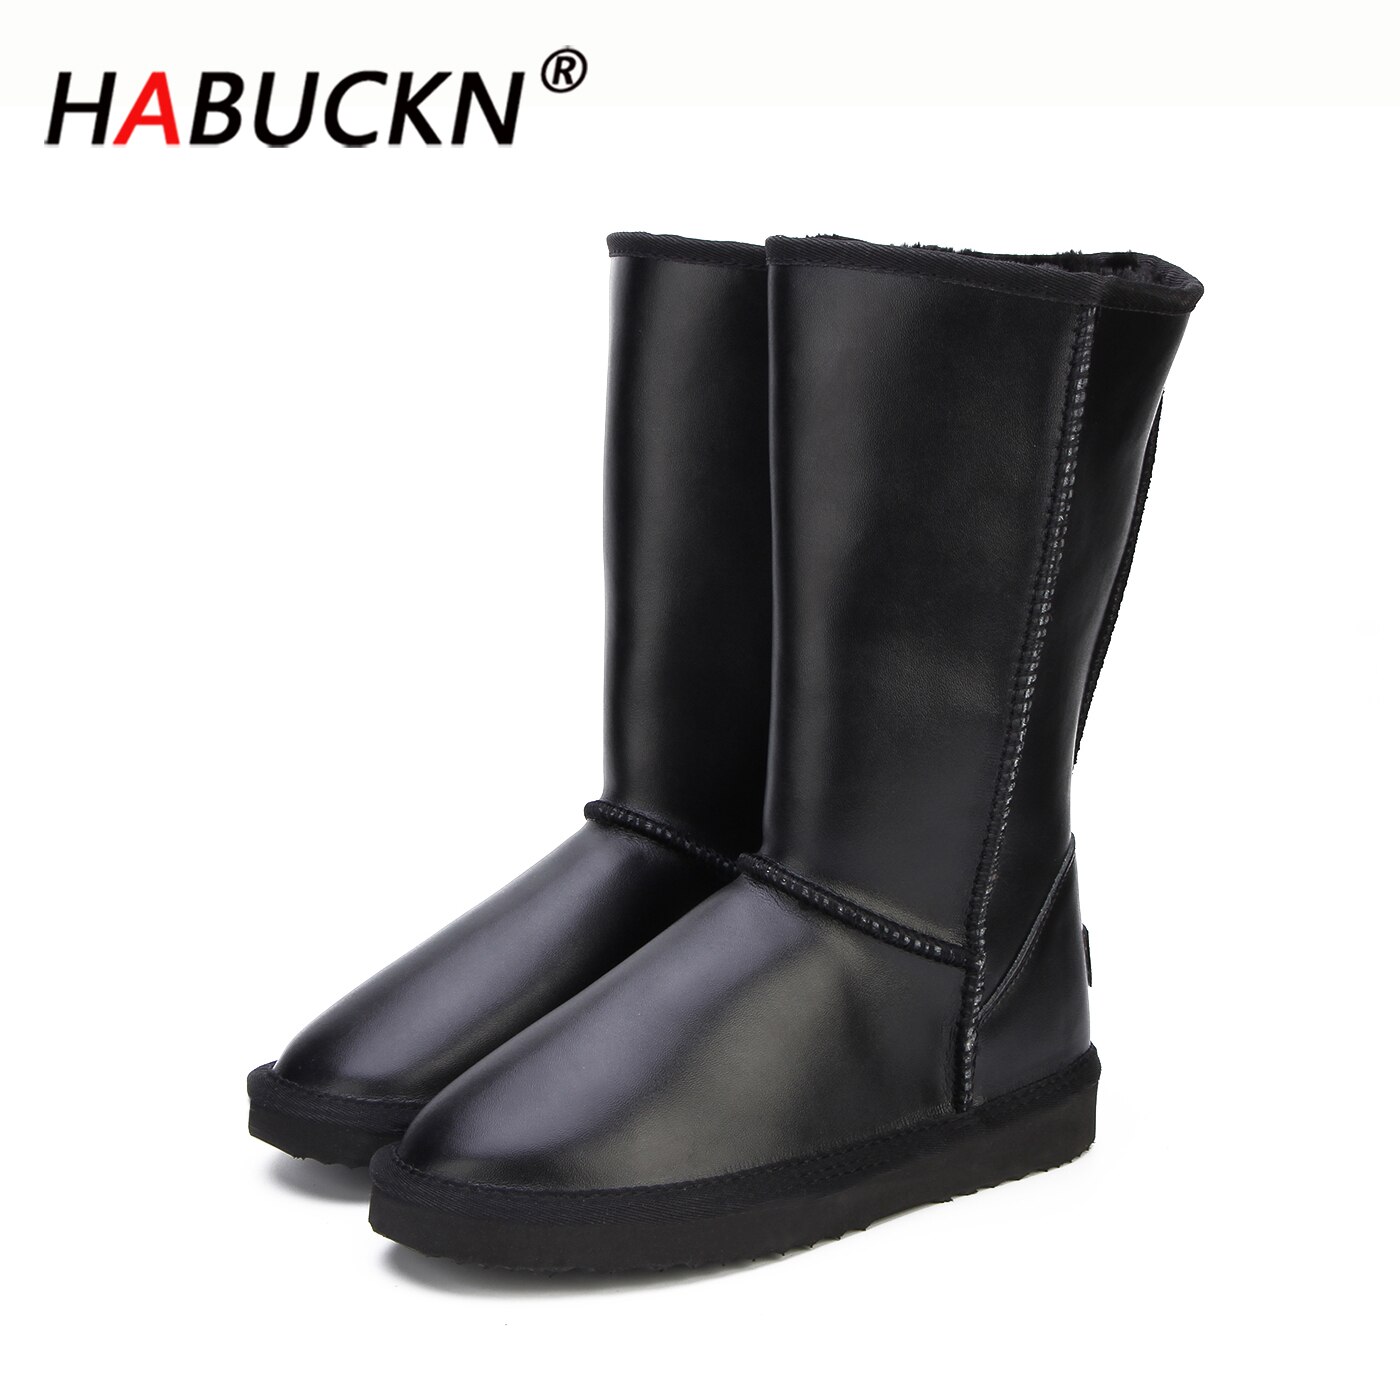 HABUCKN 2020 NEW Women Shoes Winter Boots Genuine Cowhide Leather waterproof fashion casual woman snow boots 6 color US 3-13